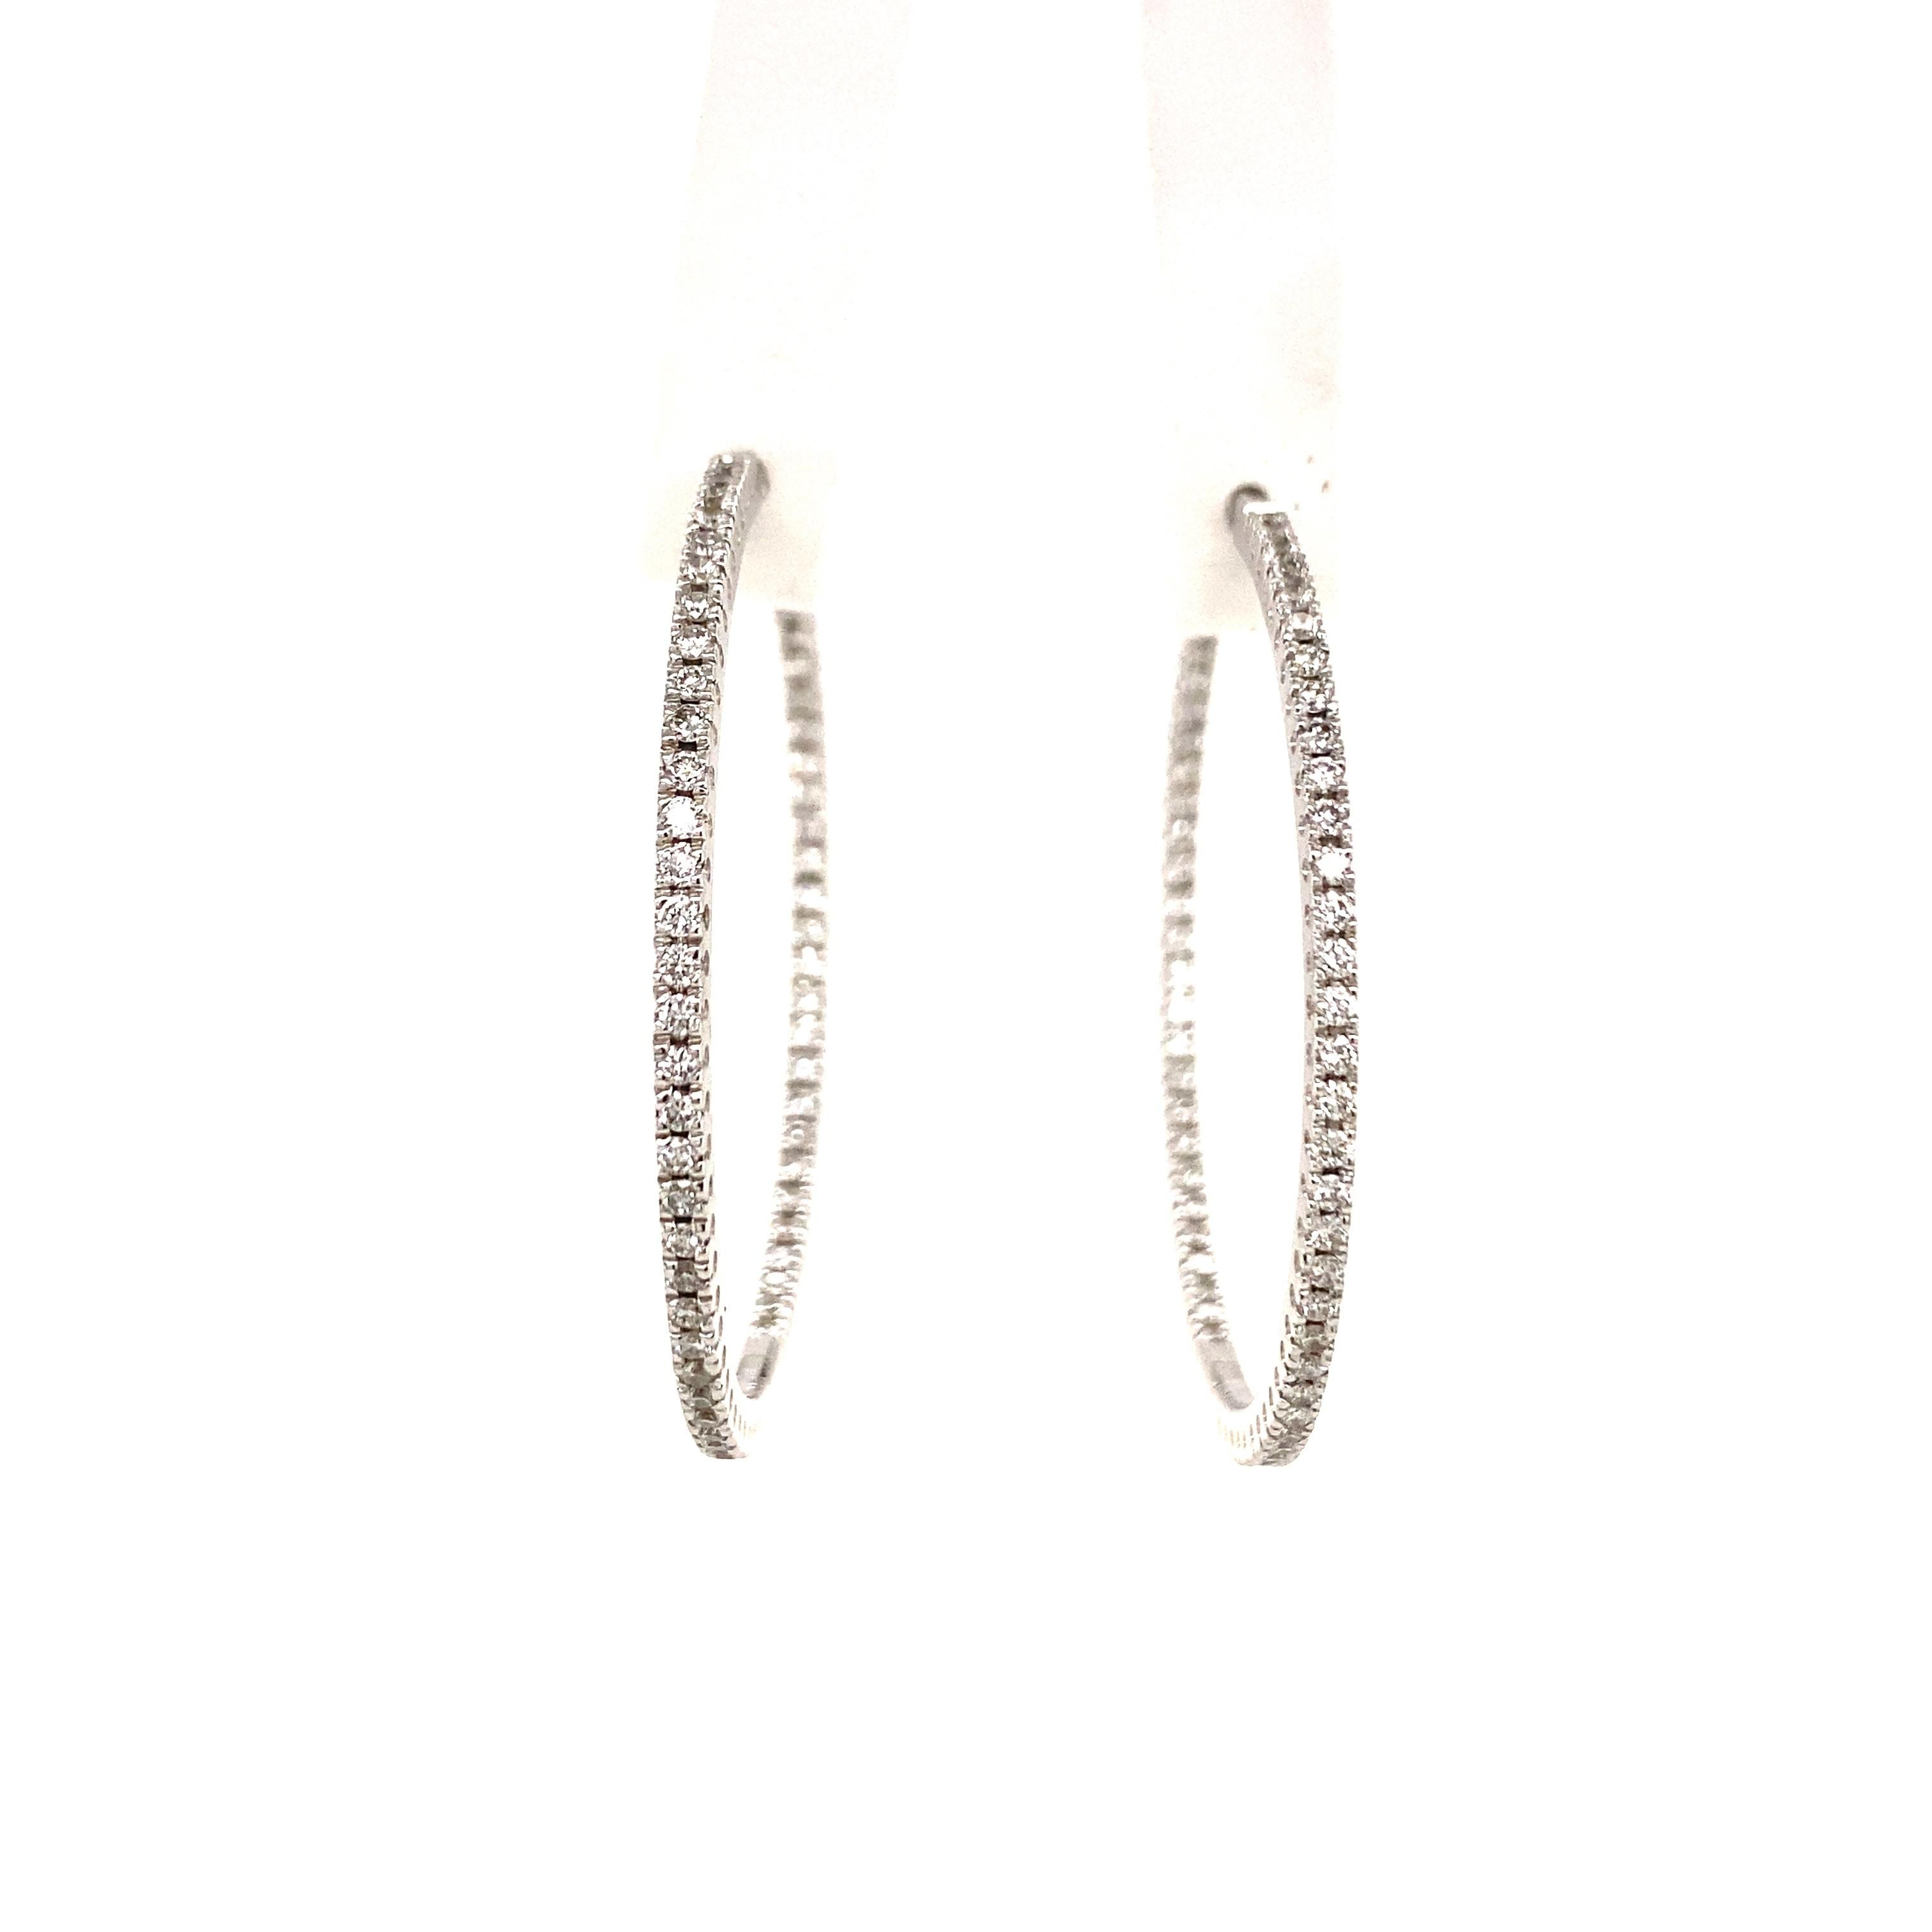 This classic pair of earrings is set with 126 brilliant cut diamonds of G/H colour and si clarity, total weight approximately 2.50 carats.
With their fine elegance, these earrings can be worn for any occasion - be it casual during the day or for the